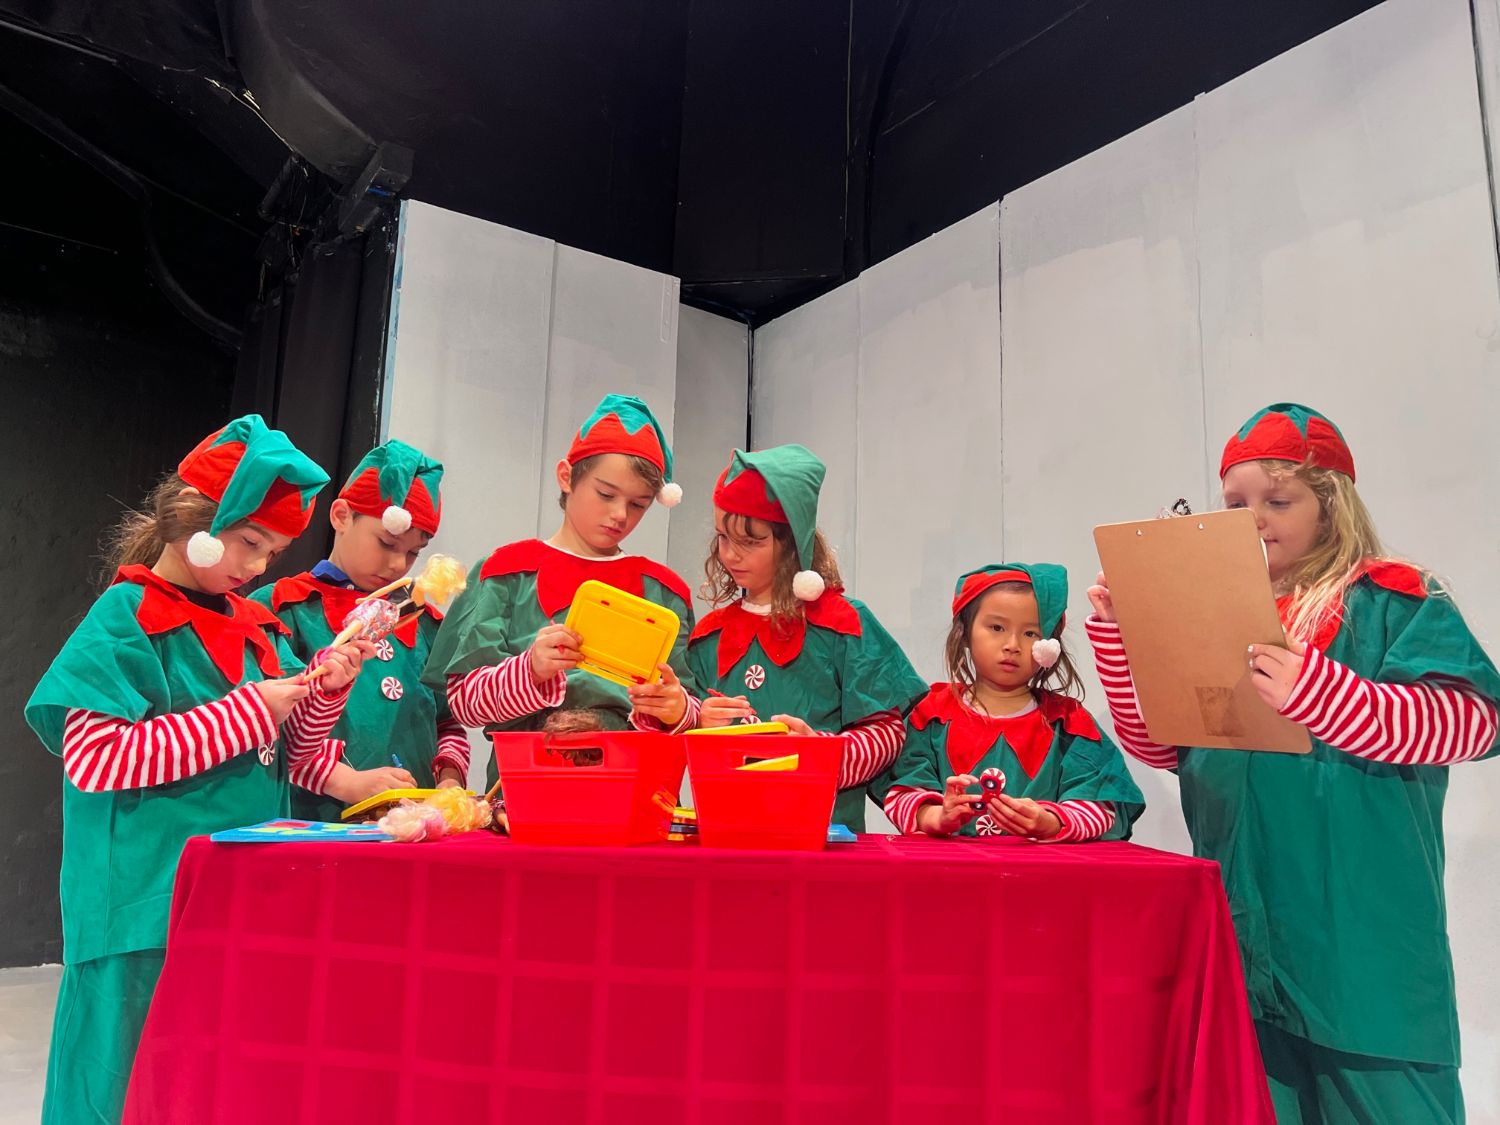 PHOTO: provided by YST | The South Pasadenan | The cast of Elf Jr. at Young Stars Theatre.